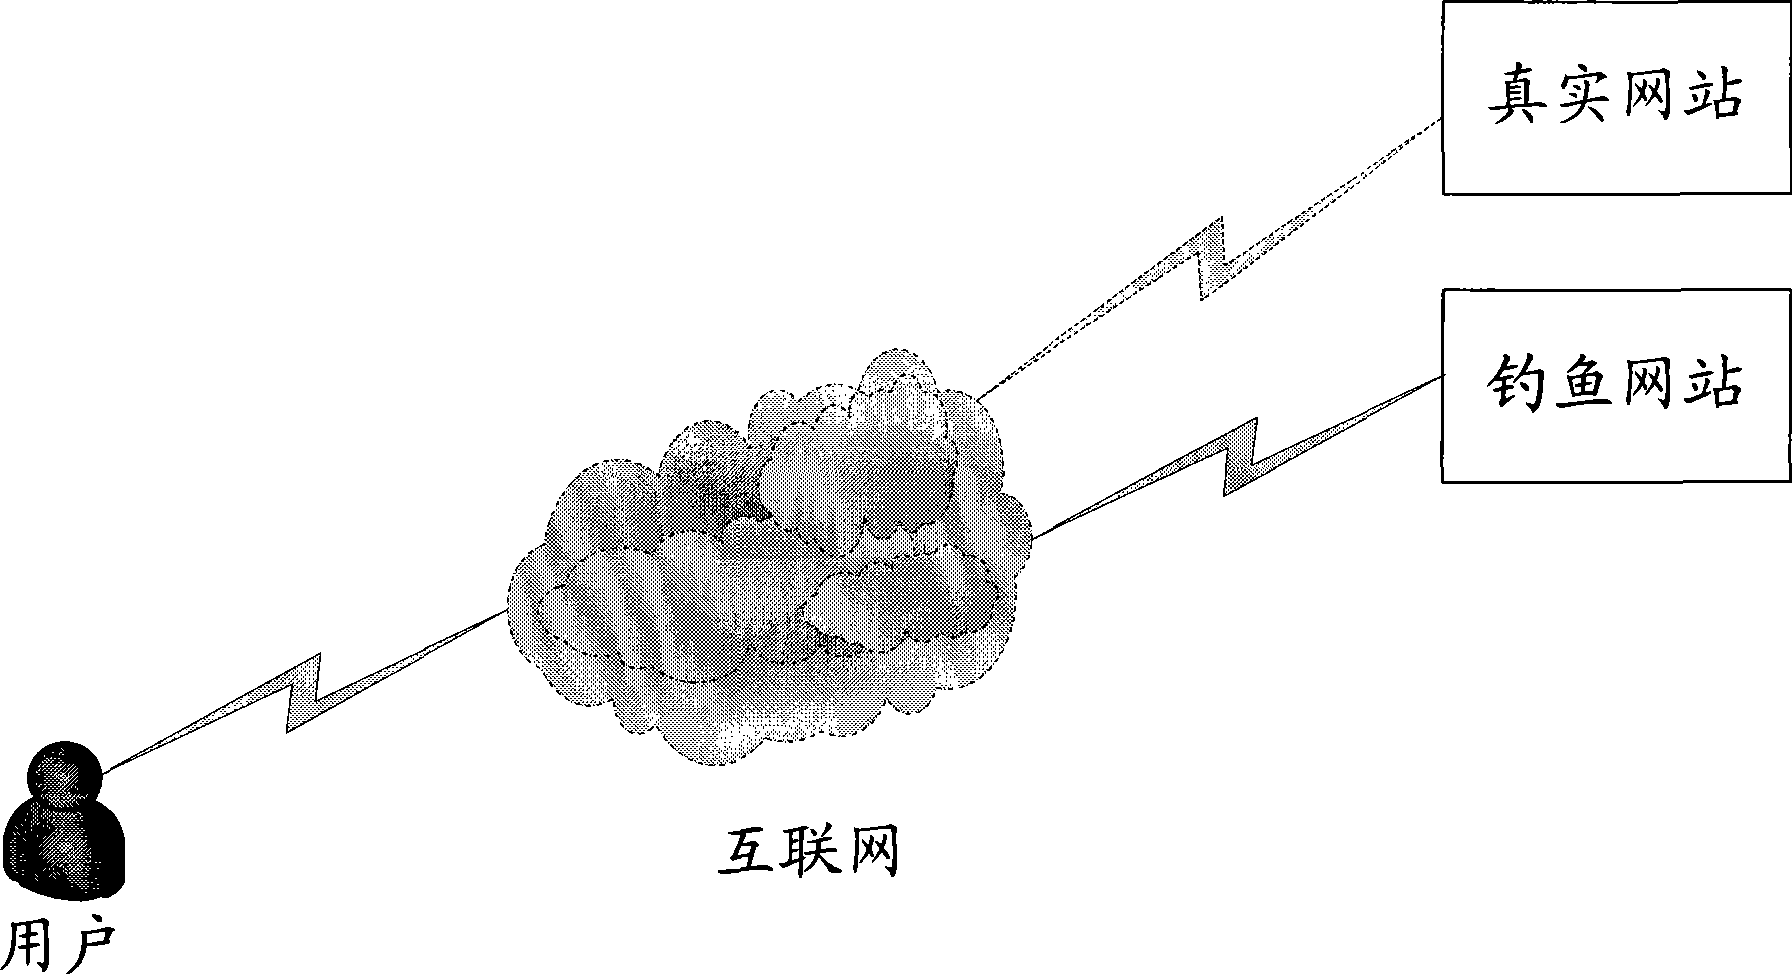 Detecting method and a device for fishing website